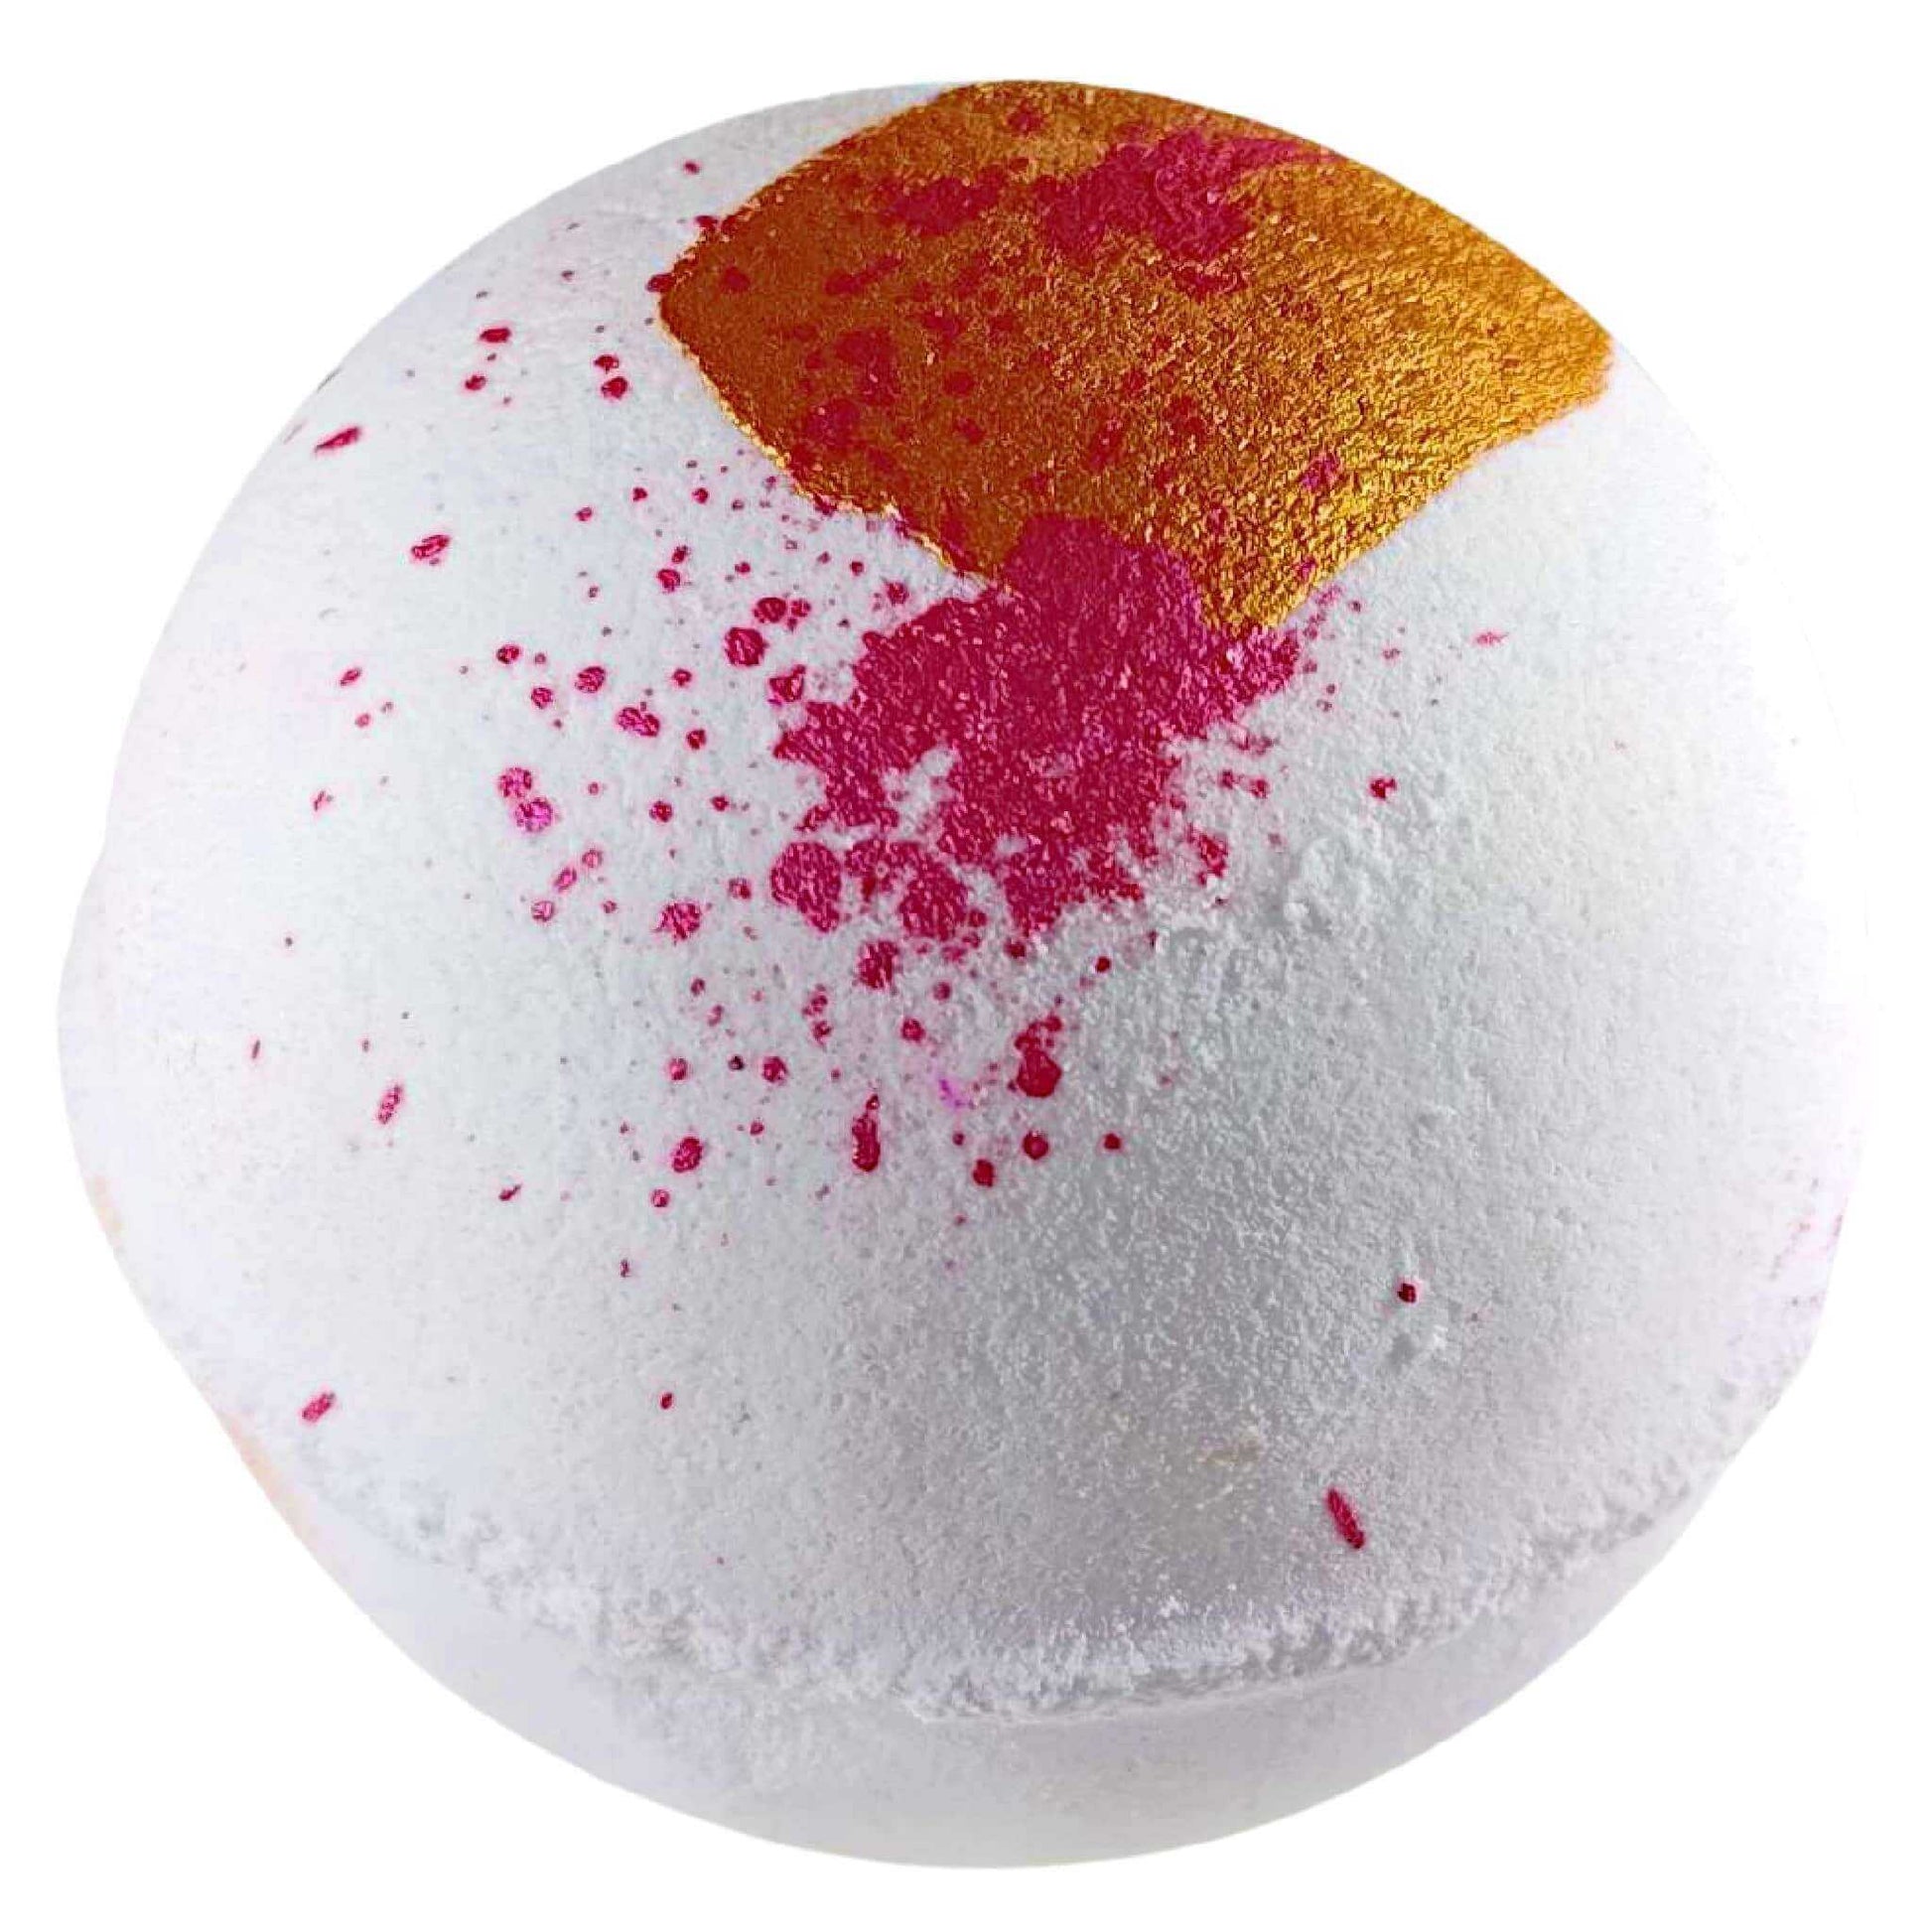 Rose Gold Collagen Aromatherapy Bath Bomb is here. Transform your bath into a spa retreat now!